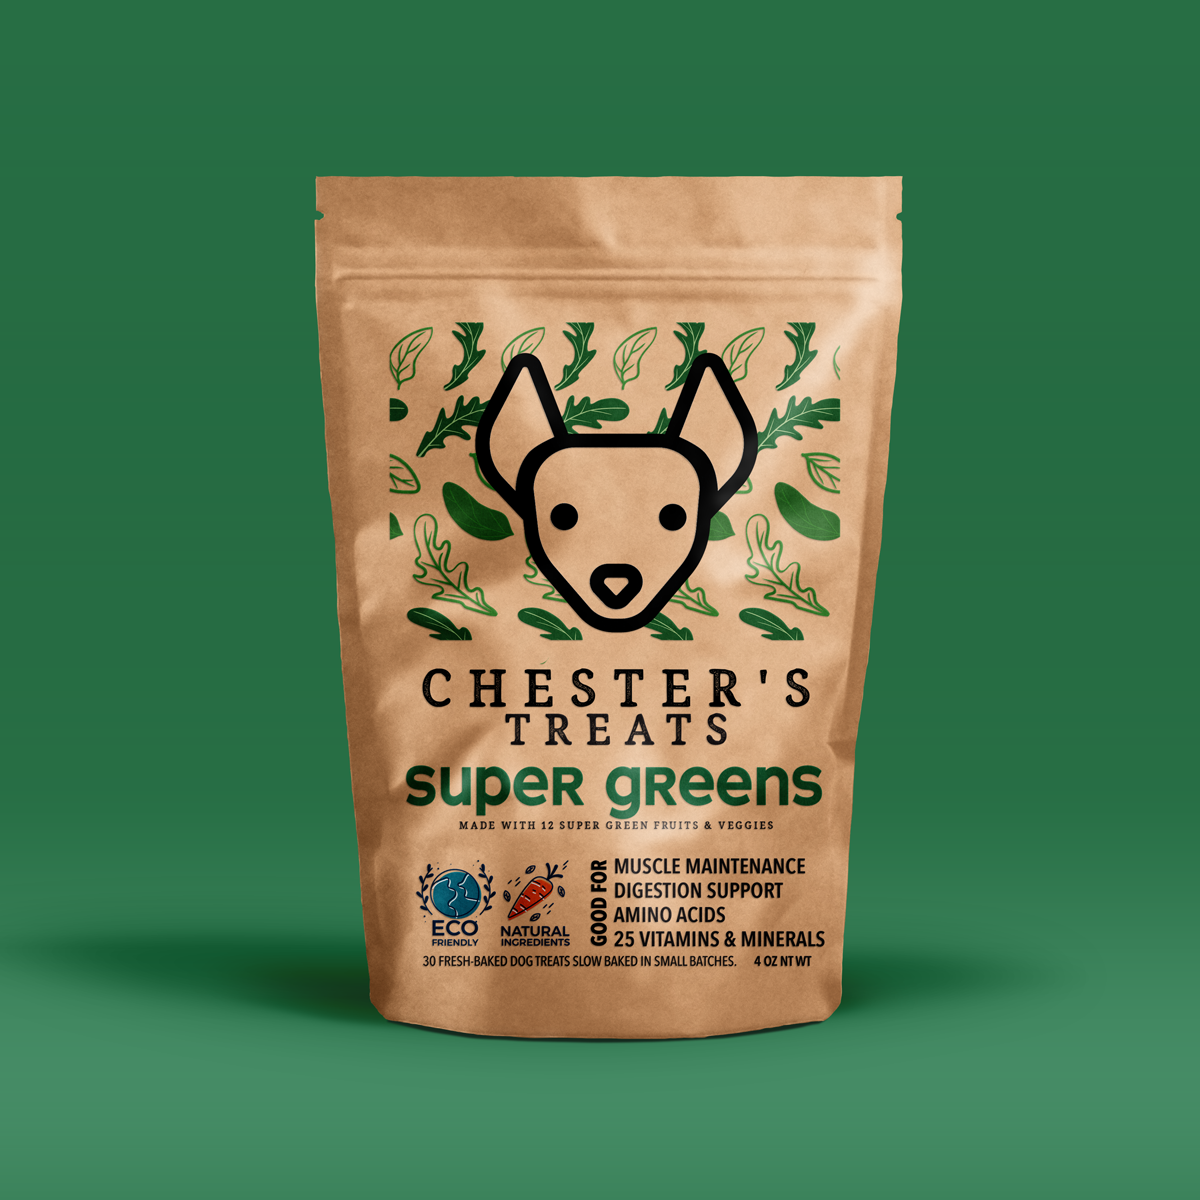  CHESTER's Super Greens Dog Treats: Muscle fuel, digestion bliss, amino acid boost! 25 vitamins & minerals. Natural, delicious, family-owned love. Power up your pup!